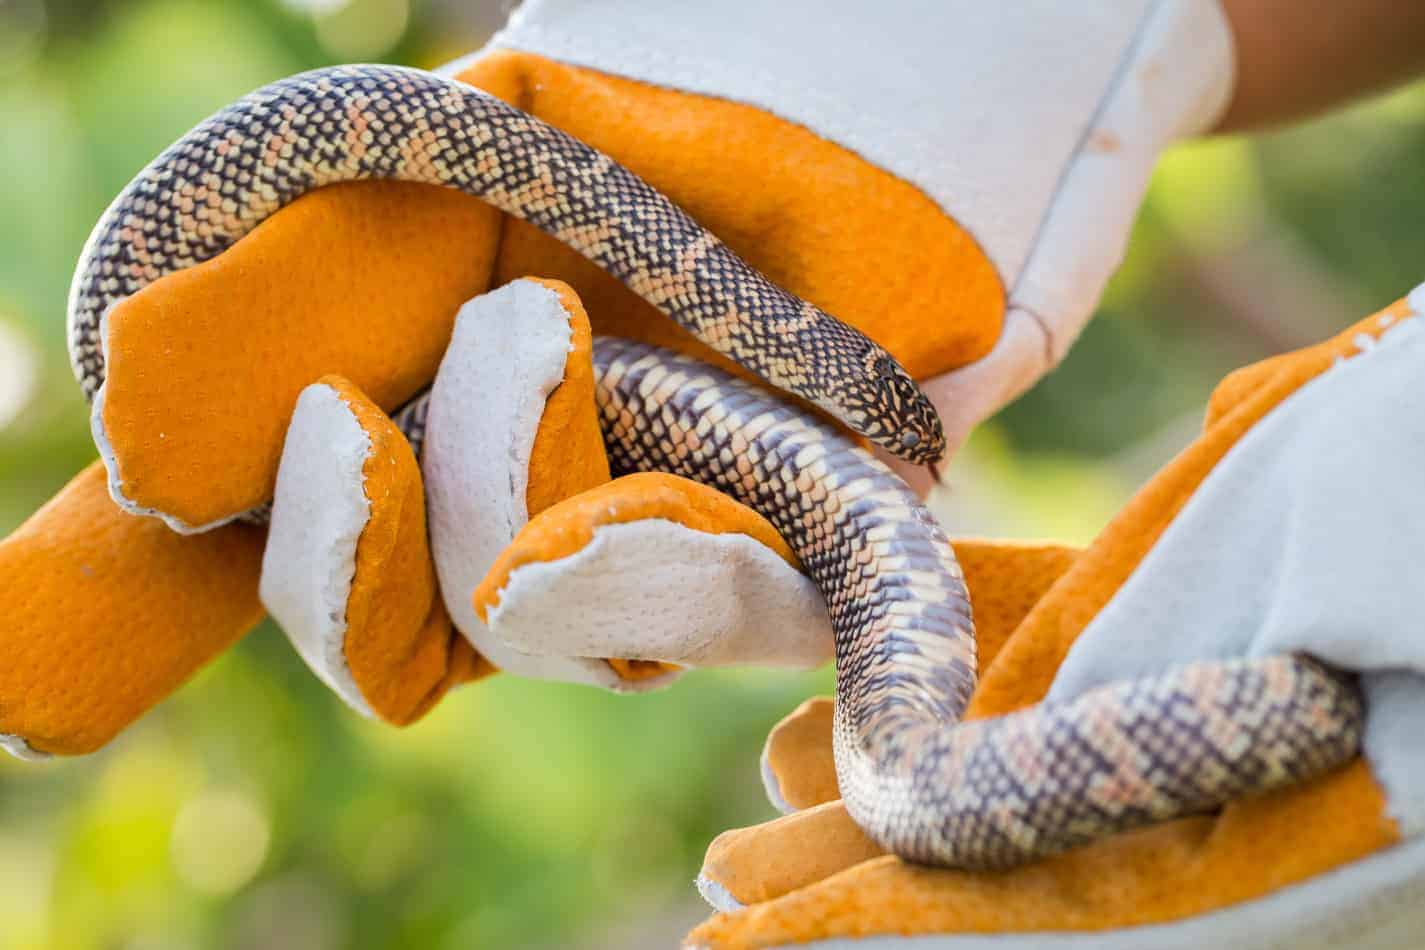 How to catch a snake safely How To Catch a Snake Safely (With Pictures)